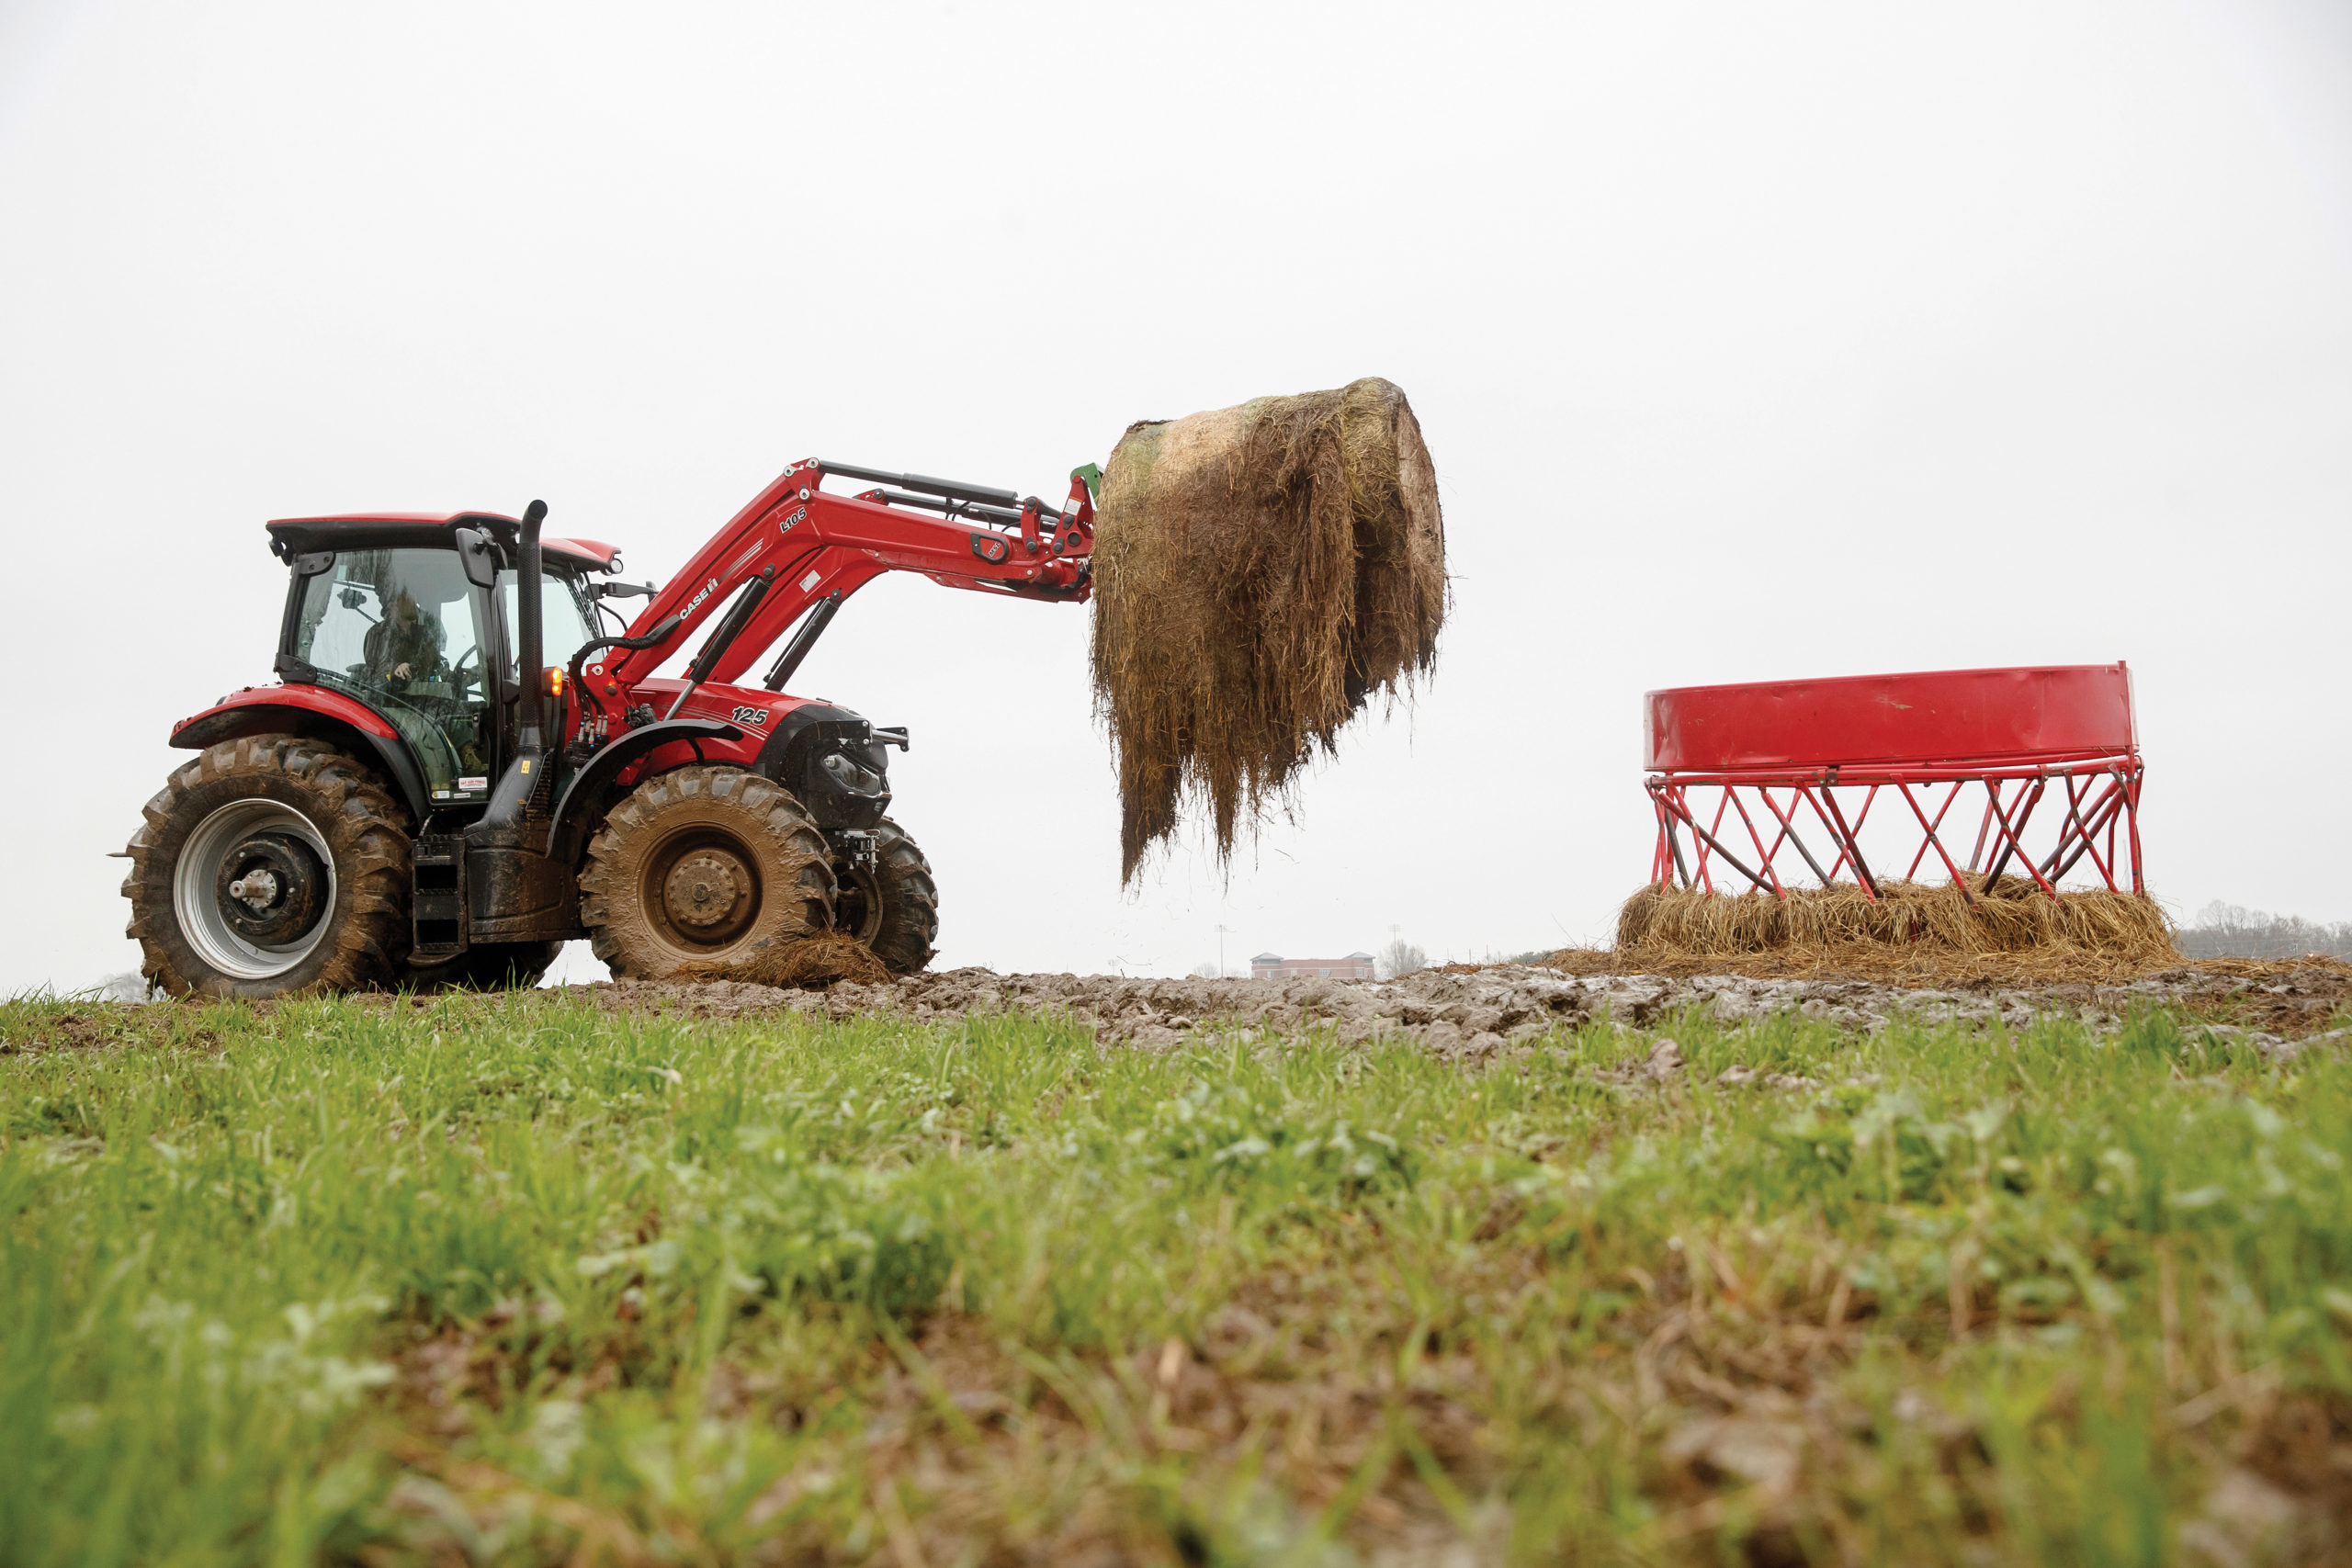 A red tractor lifts a large hay bale